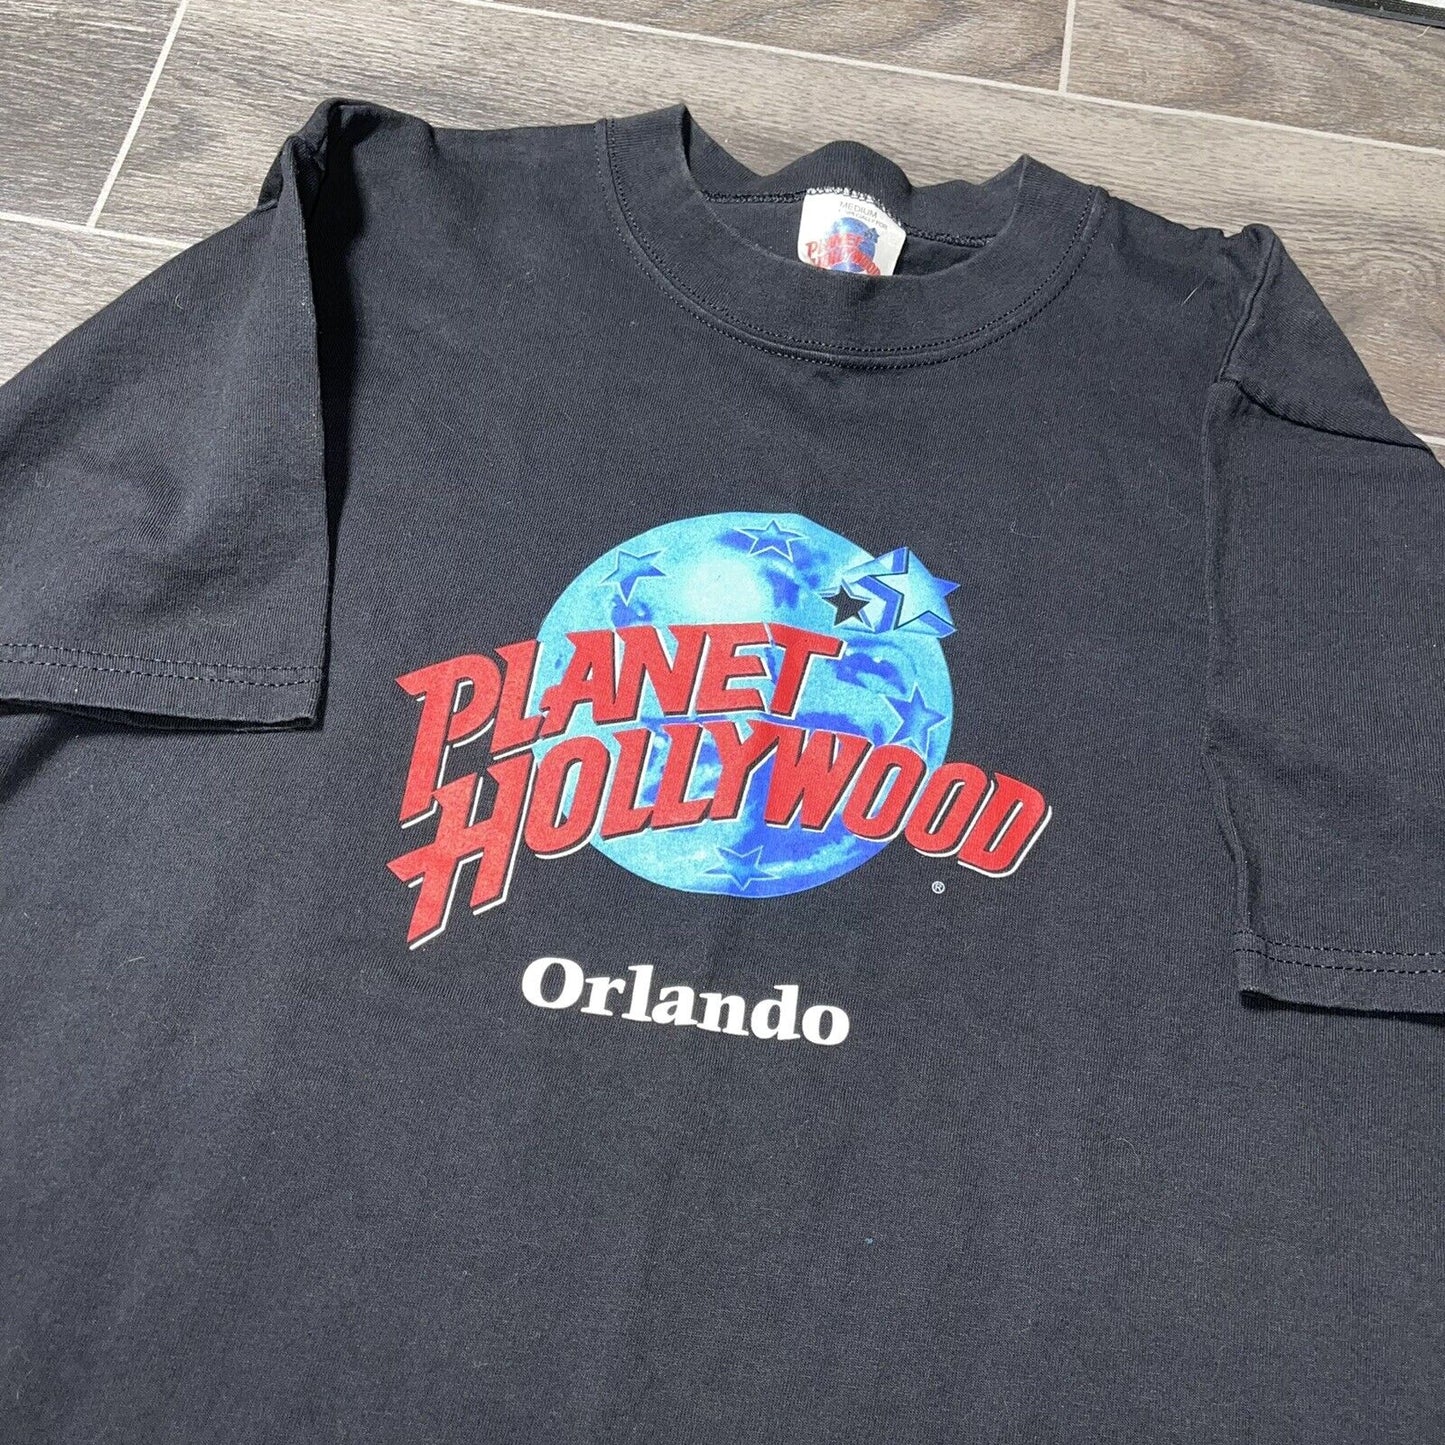 Vintage 90s Planet Hollywood Orlando Graphic T Shirt Size Large